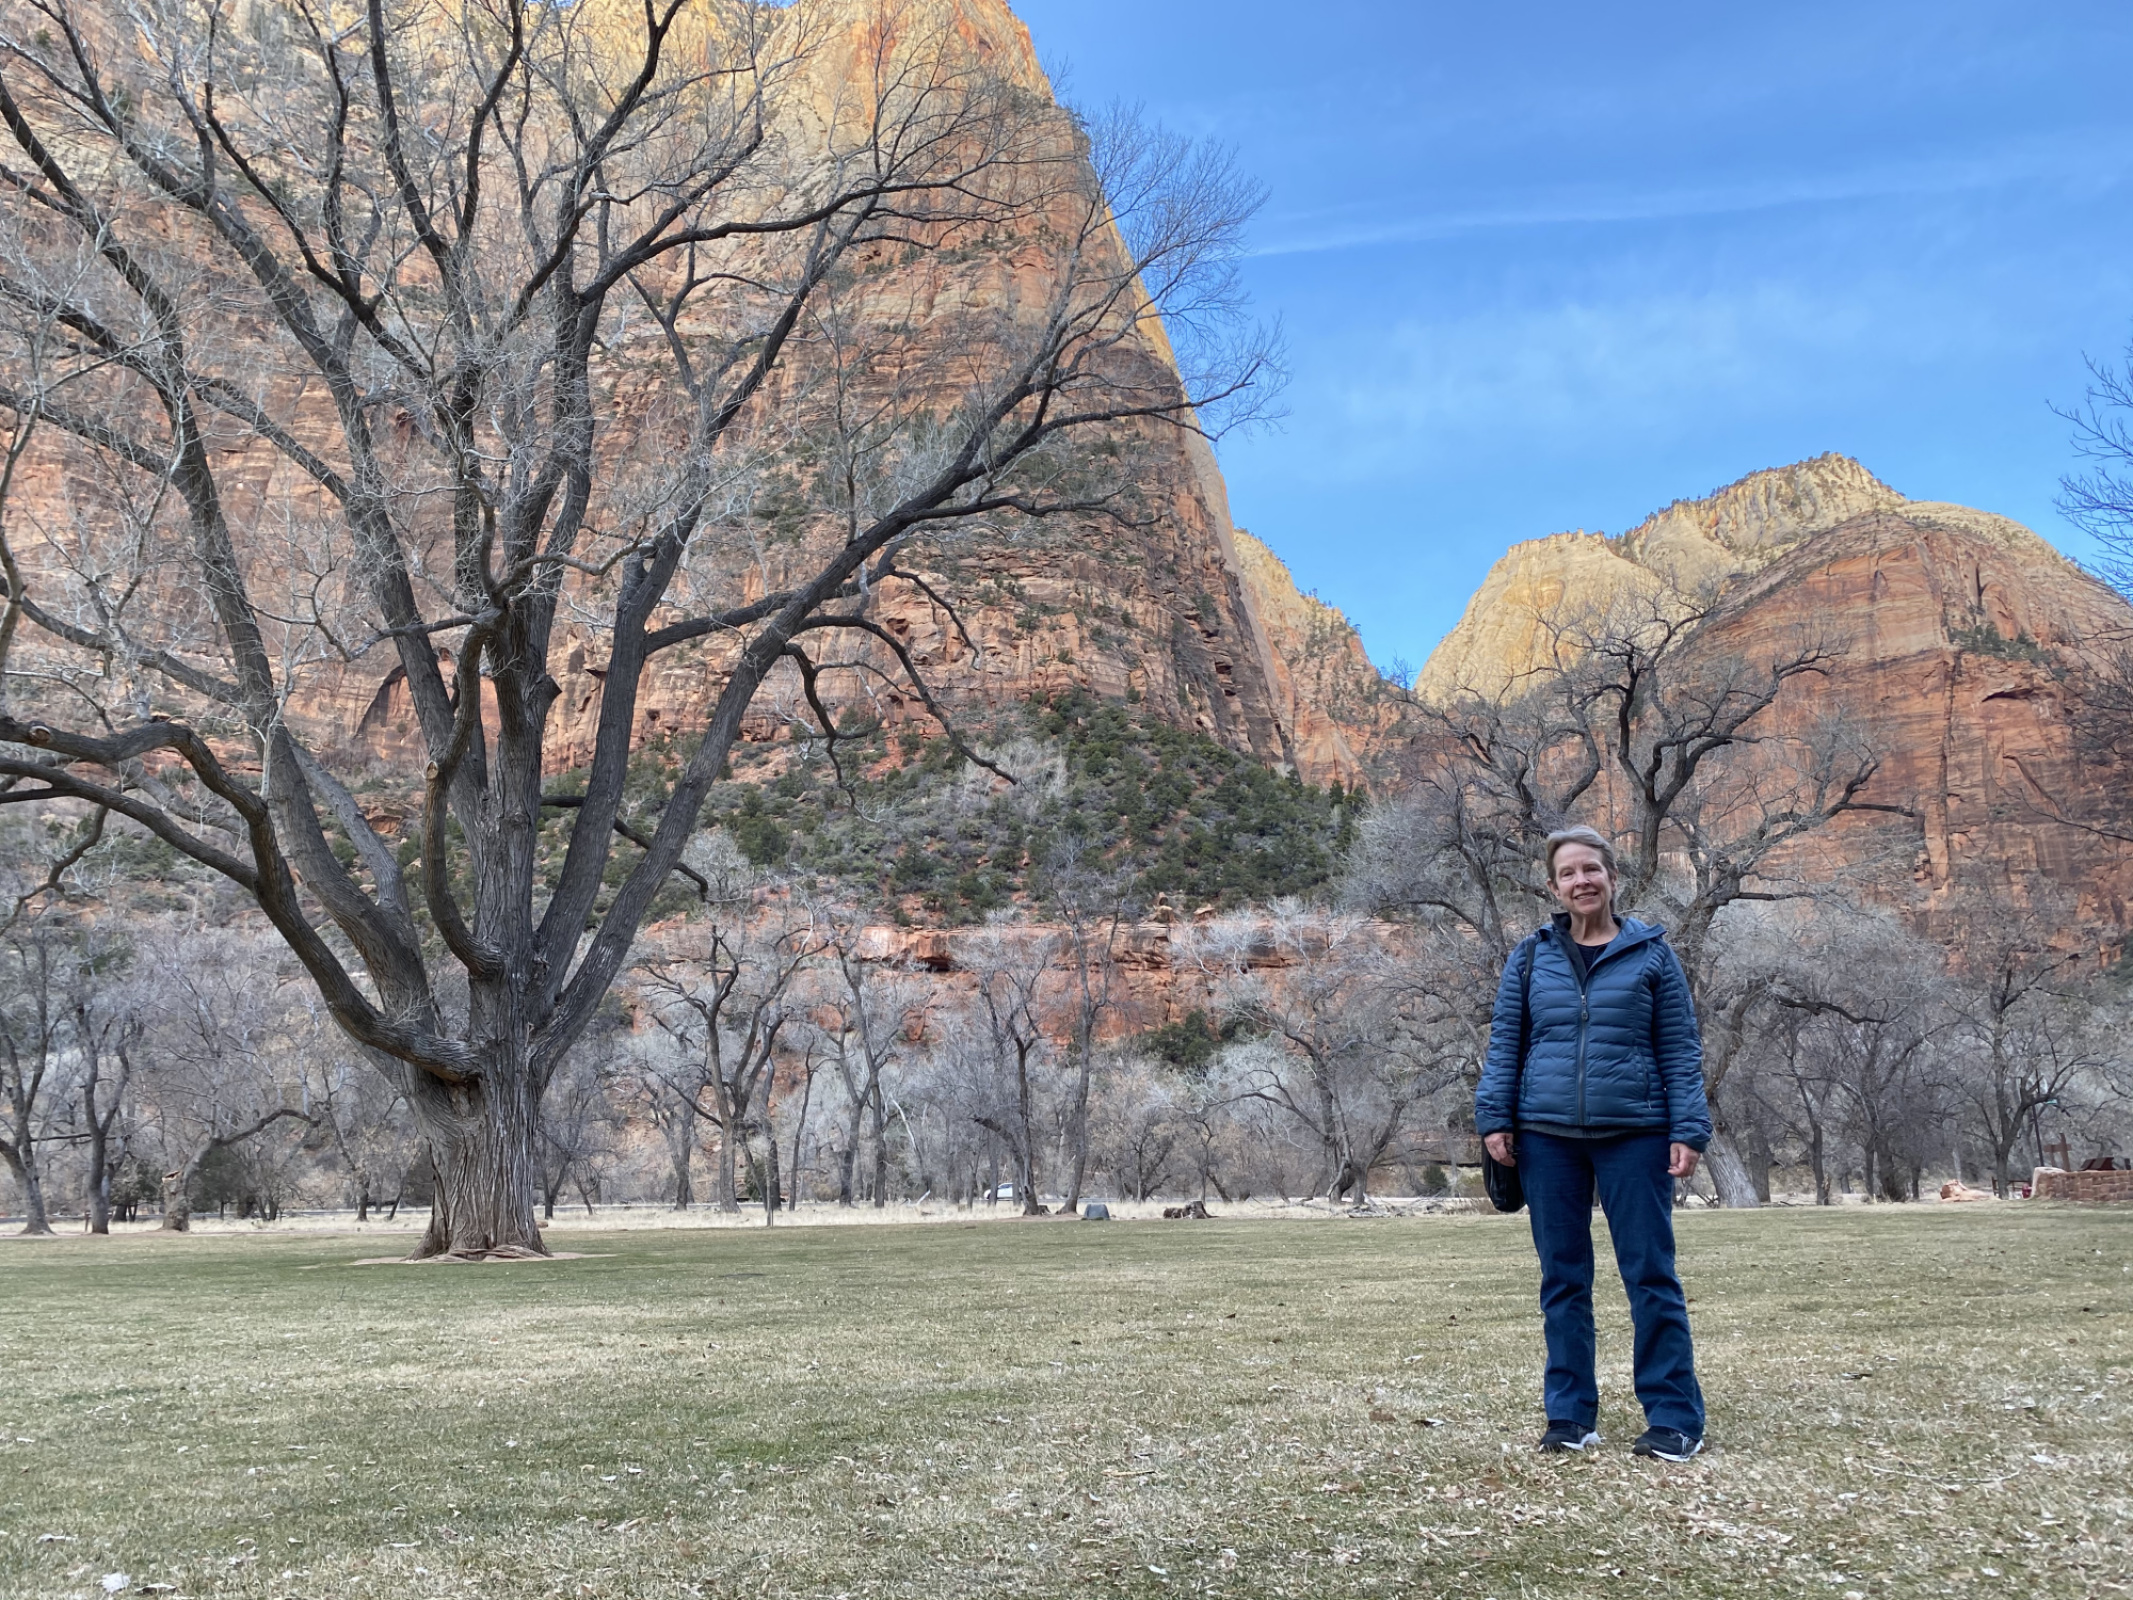 Outside The Lodge at Zion